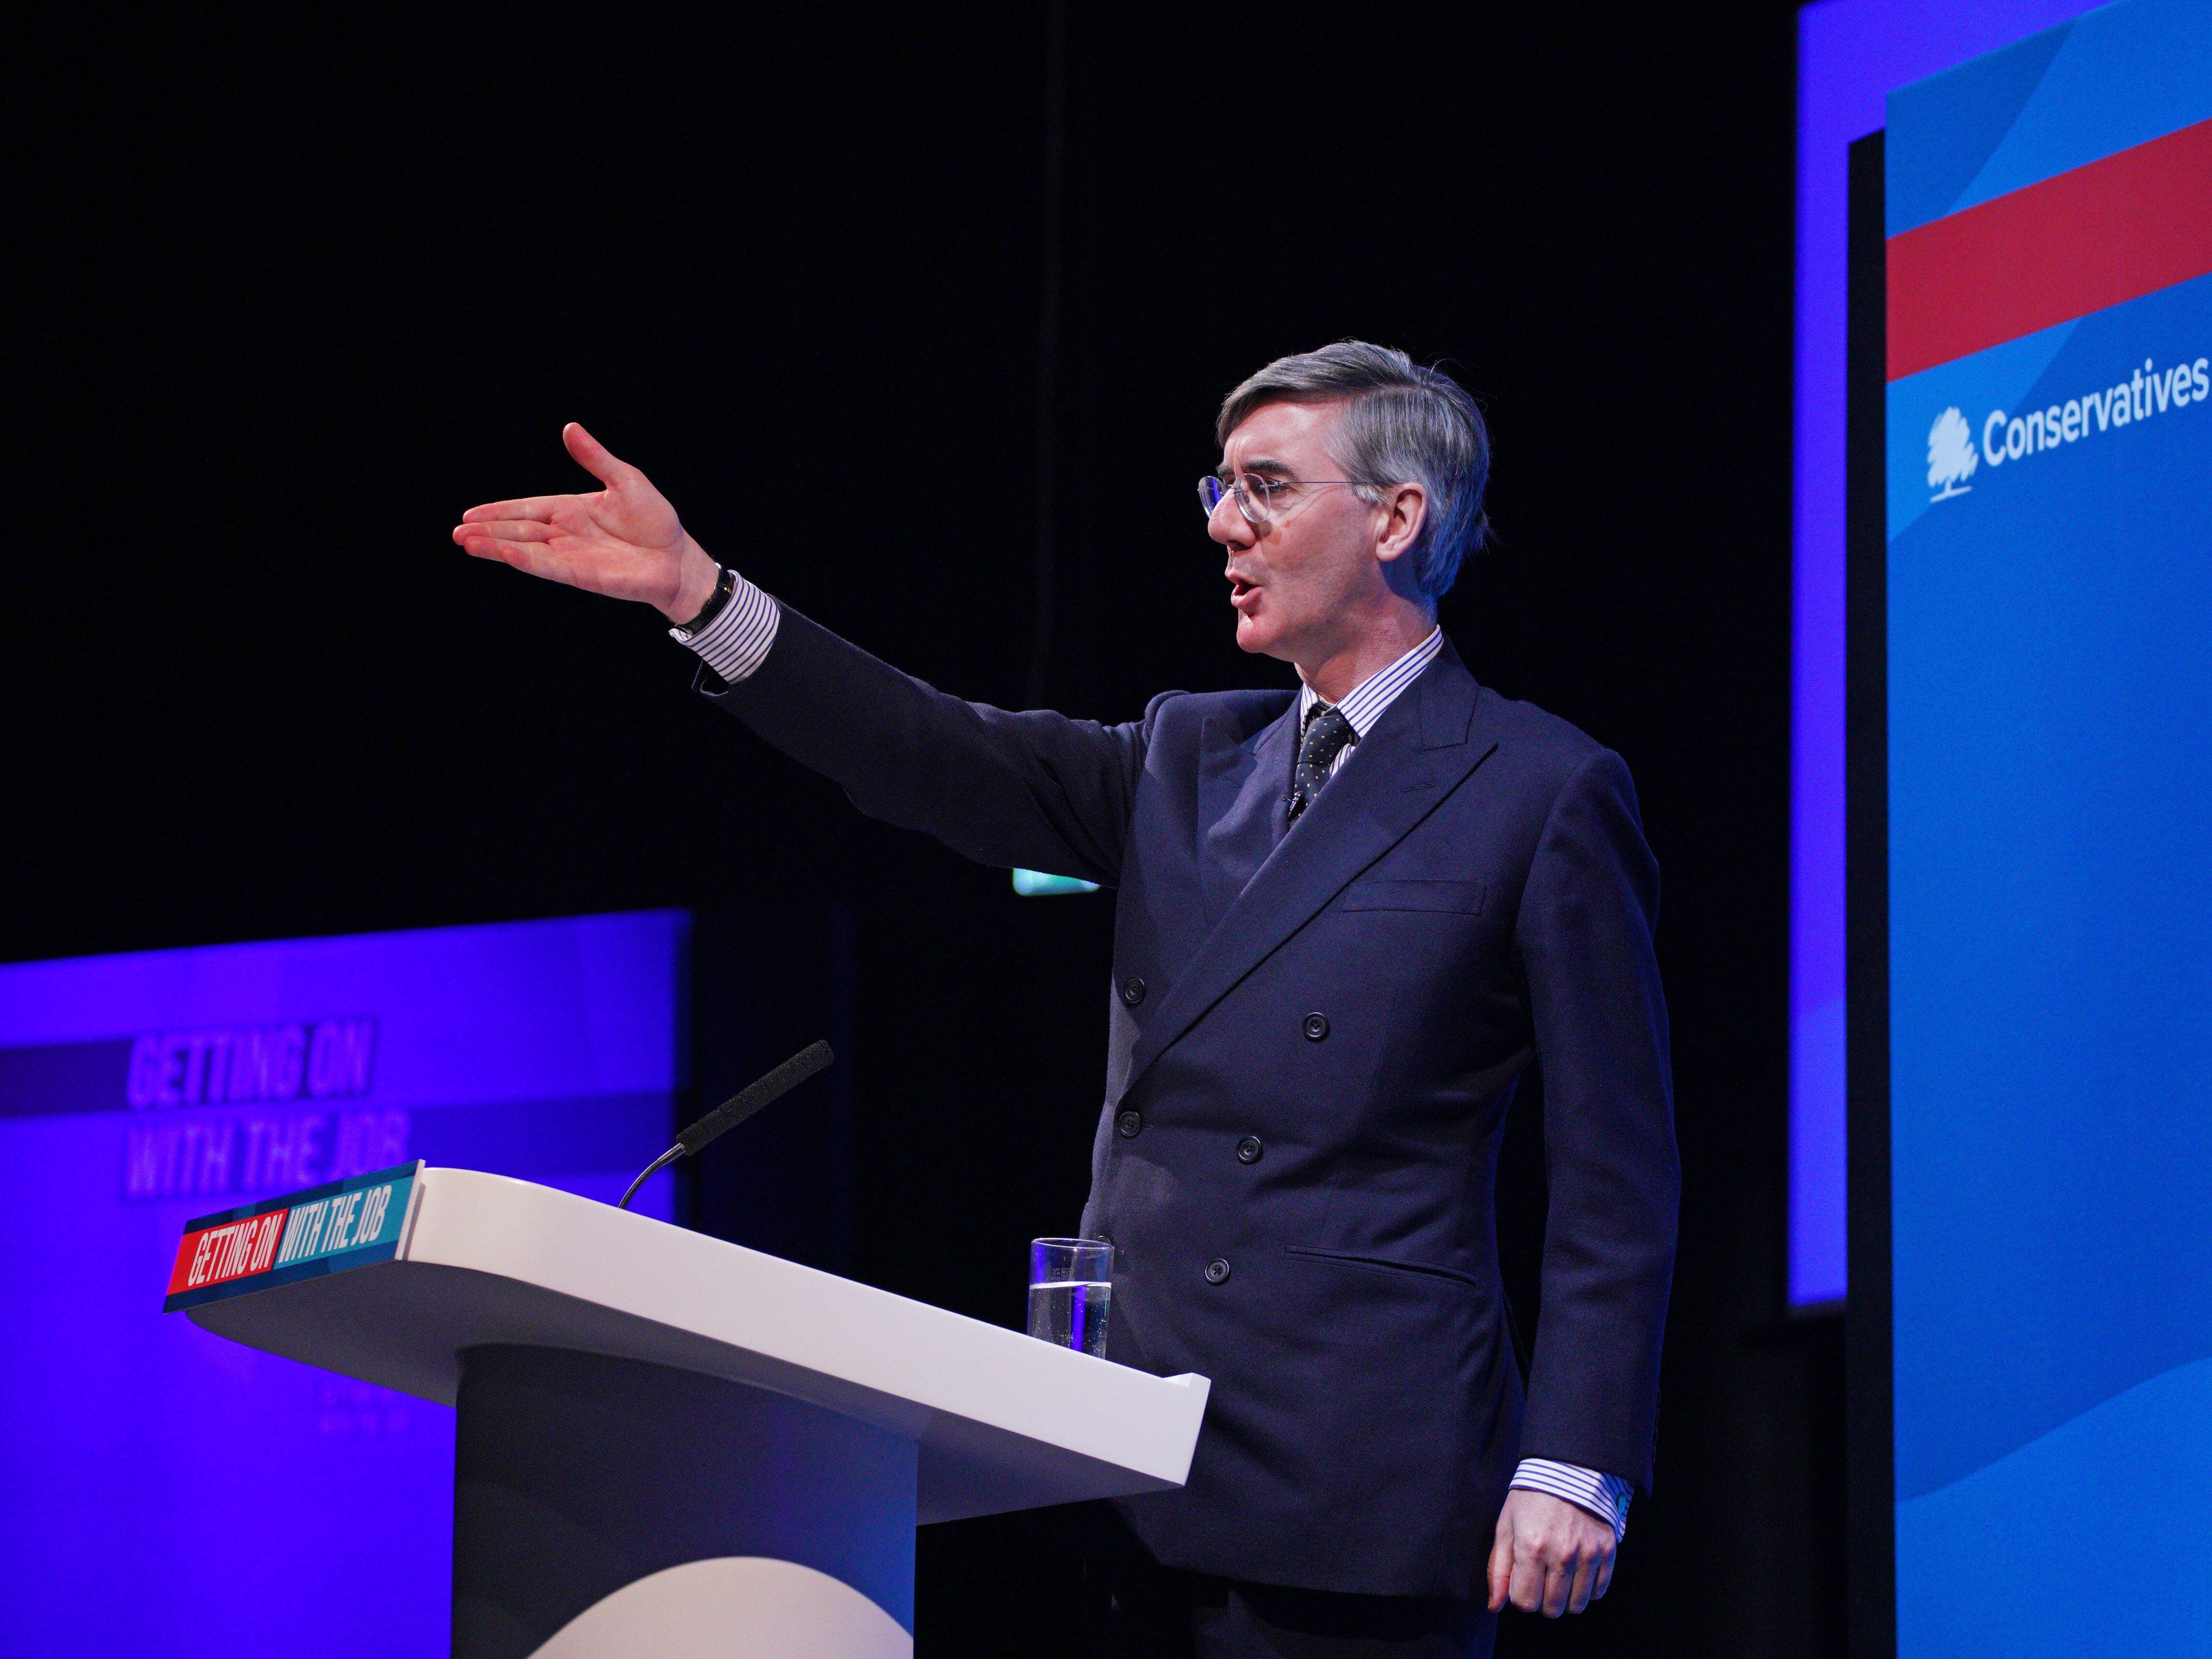 Senior Tories vow to cut taxes after rallying cry from Jacob Rees-Mogg